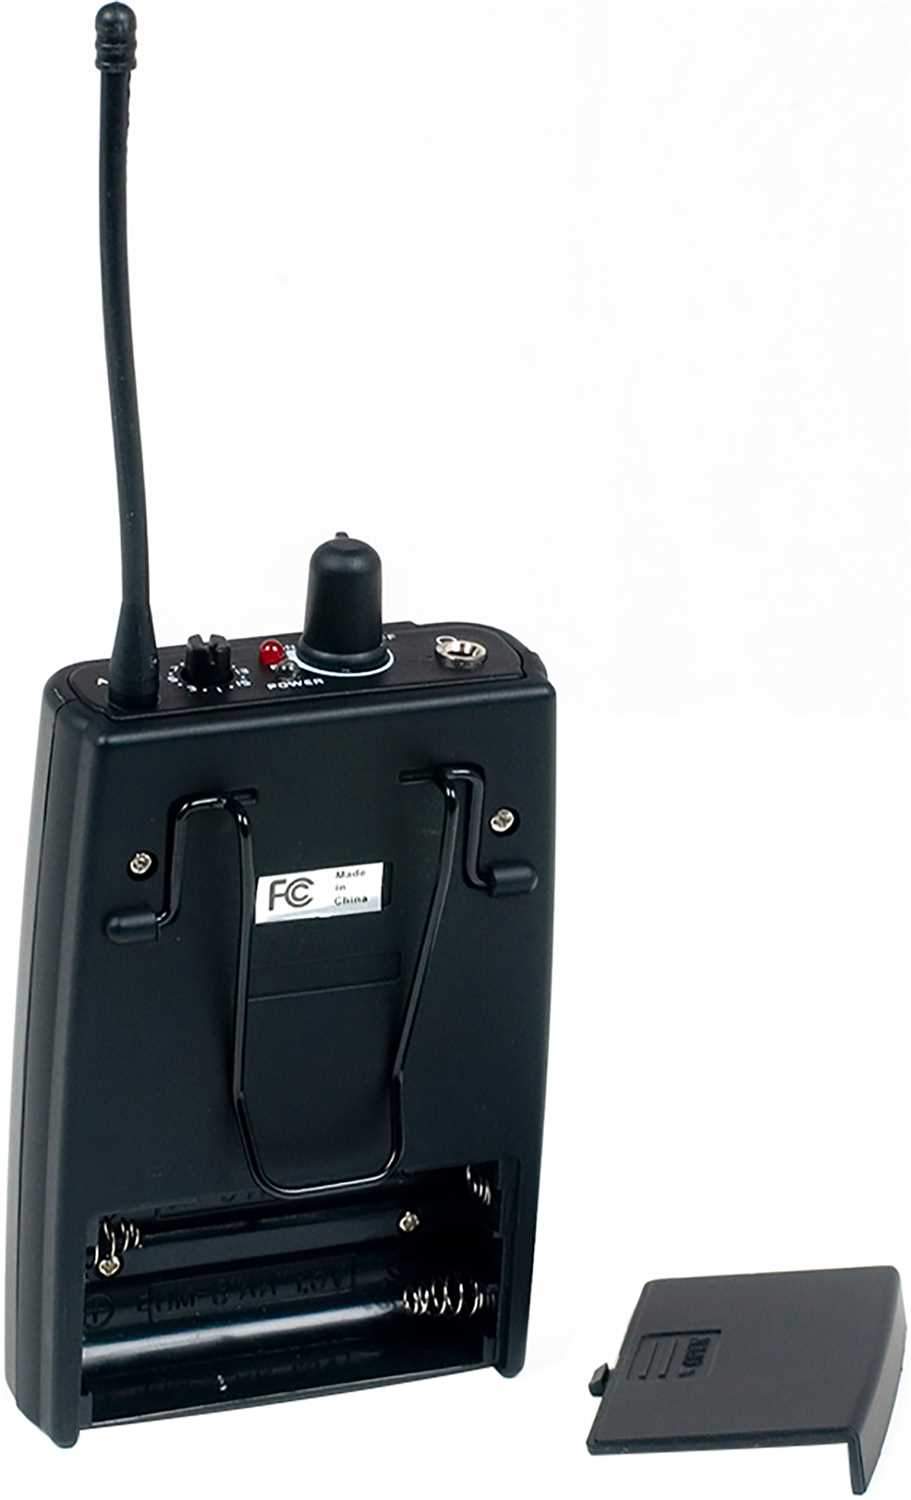 VocoPro Silent PA-IN-EAR-1 In-Ear Wireless Monitor System - PSSL ProSound and Stage Lighting